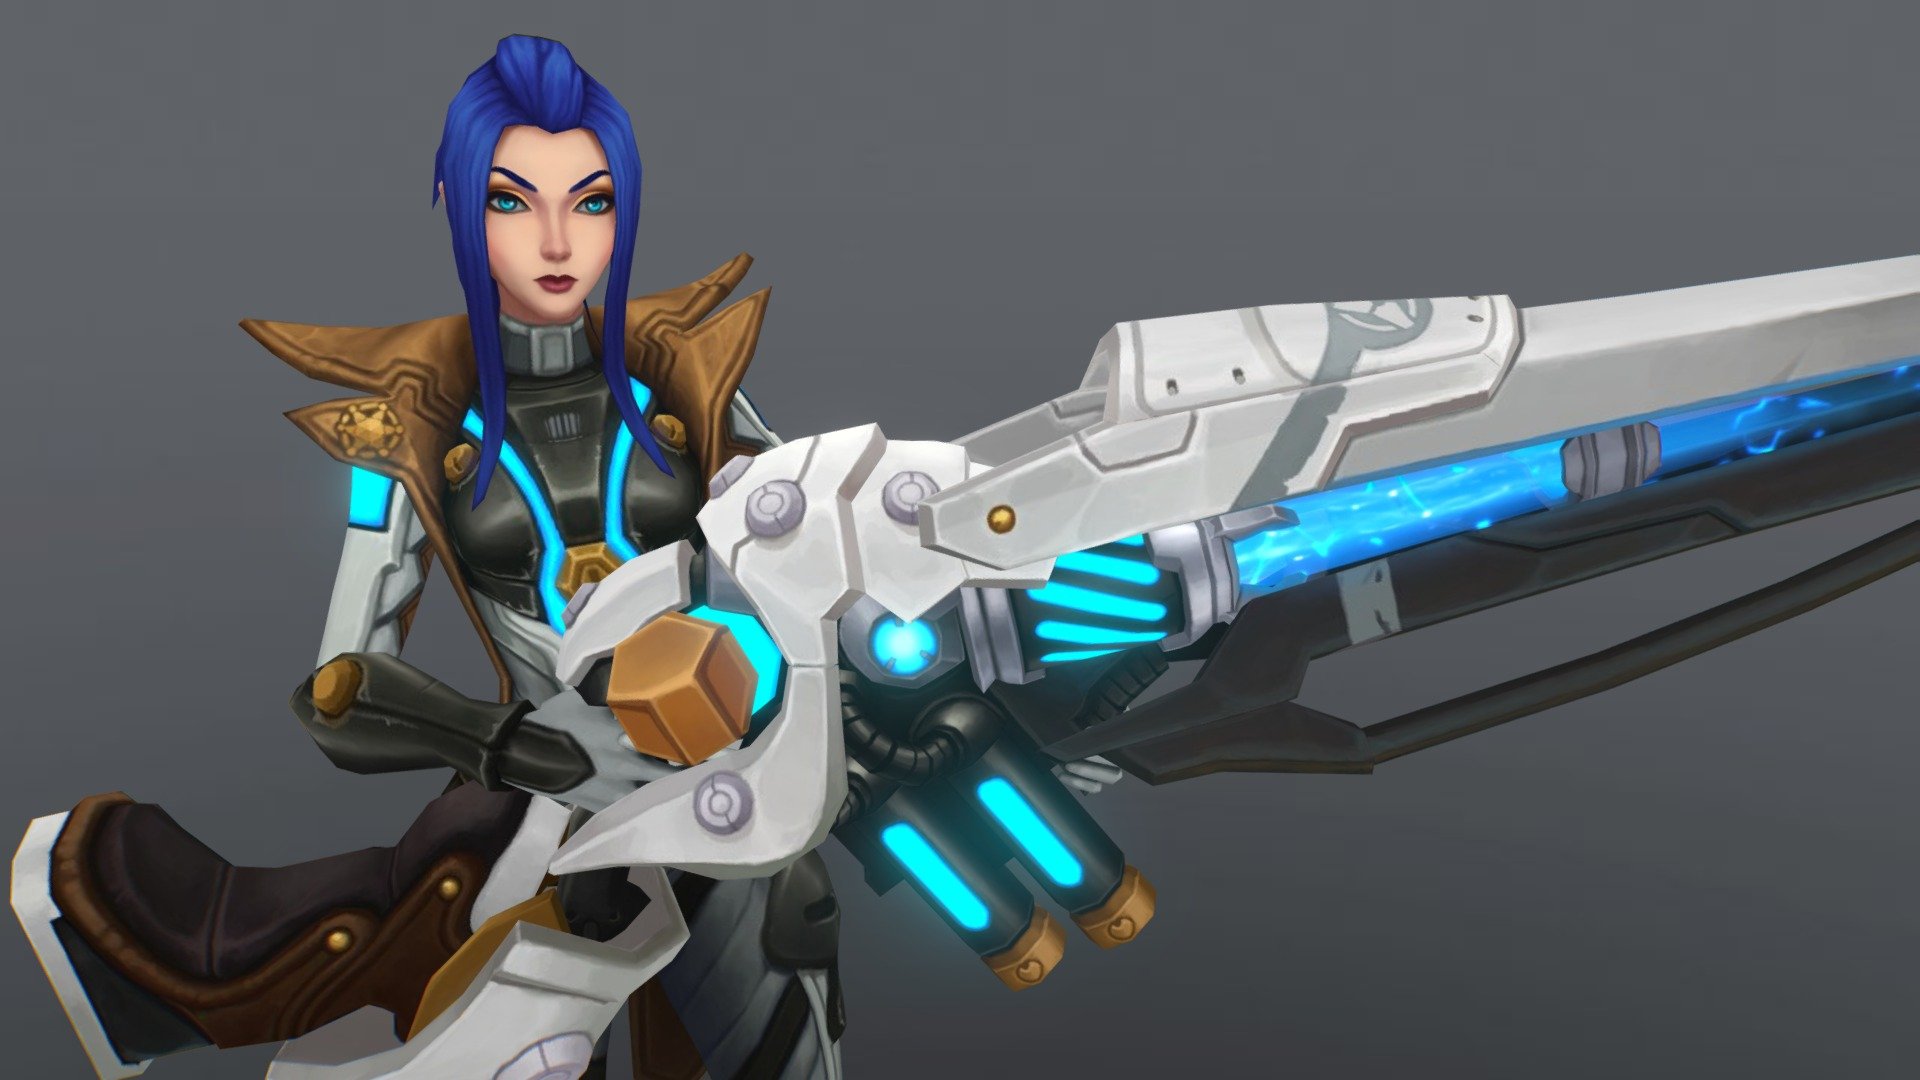 Pulsefire Caitlyn, for shots: ArtStation! 

Caitlyn, Modeled &amp; Textured by me.

Guns, Modeled by Oscar Monteon,  &amp; textured by me.

the pedestal, the FX shown here, &amp; the blue reflections on the gun are added just for this presentation!

massive thanks to the rest of the skins team for all the effort and love that they put into her!

thanks Sunny Pandita  &amp; the rest of skins for the feedback!
many thanks for Oscar for Modeling the guns &amp; Pio Ravago for the amazing feedback!

JP Putnam &amp; Moonyoung Oh on the rigging &amp; skinning, &amp; Chris Hsing, Jason Shum, Brittany Gleiter, Nick Beckstead, &amp; Sho Stilo for the animations,  &amp; Isaac Woods for all the FX work! 

thanks to Austin DeVries for sound &amp; leading our Caitlyn pod, Pan Chengwei for gorgeous splash, Jean Go for help with the icons,  &amp; many many thanks to Katey Anthony for making sure Caitlyn didn't break our game!
also much thanks to PO Carlos Giffoni &amp; DM Jonathan Zabel for keeping us organized &amp; on track! :) - Pulsefire Caitlyn - 3D model by ybourykina 3d model